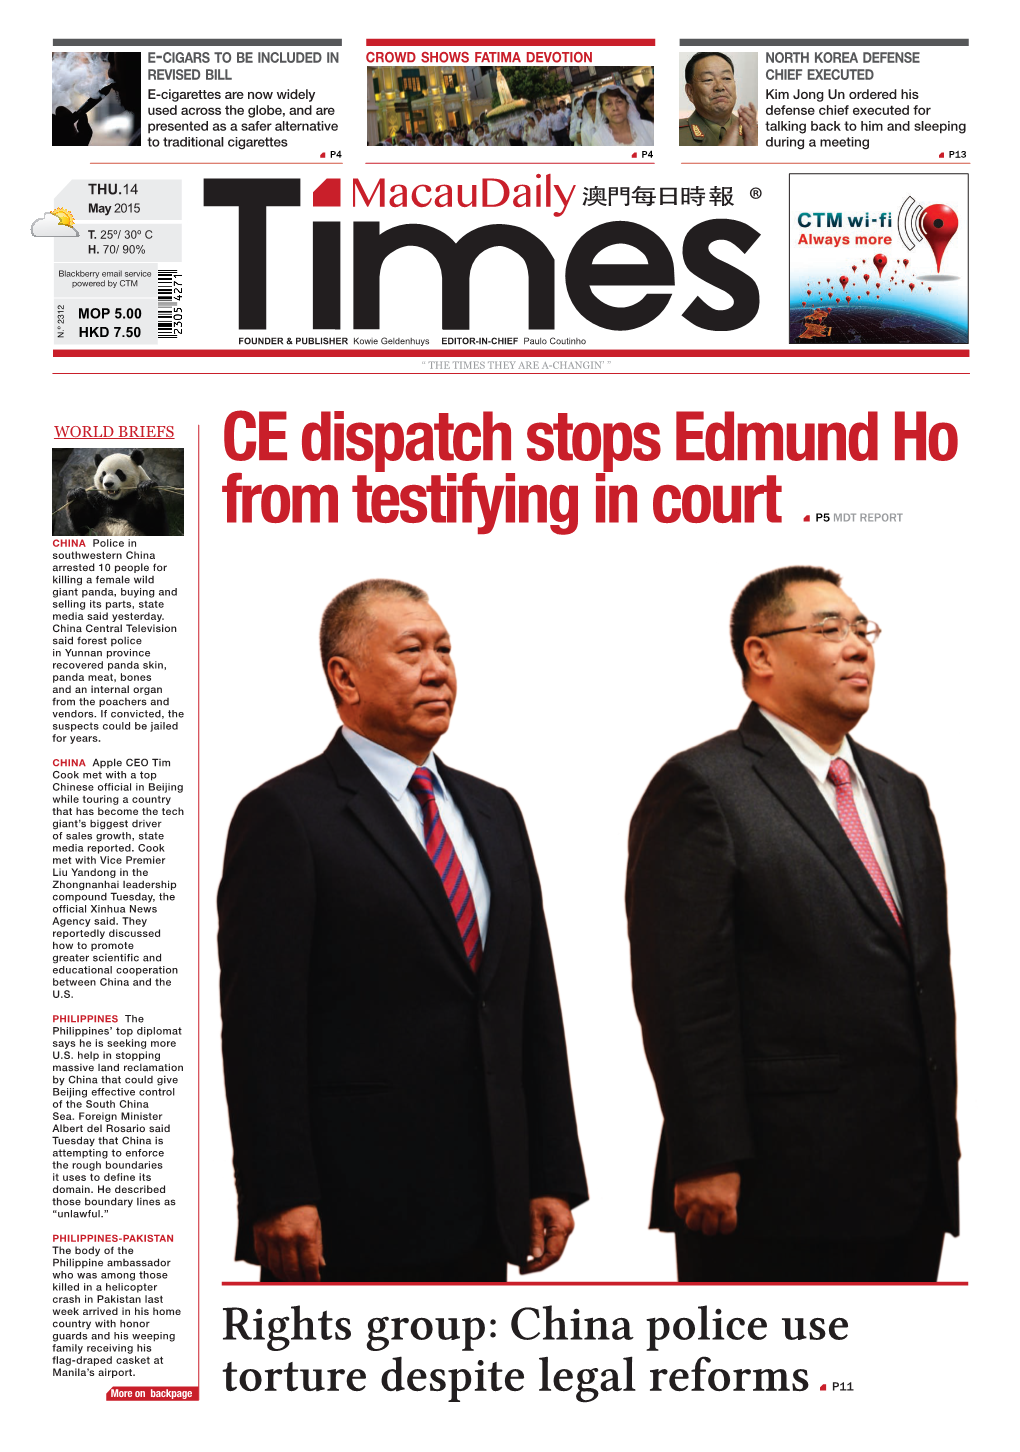 CE Dispatch Stops Edmund Ho from Testifying in Court